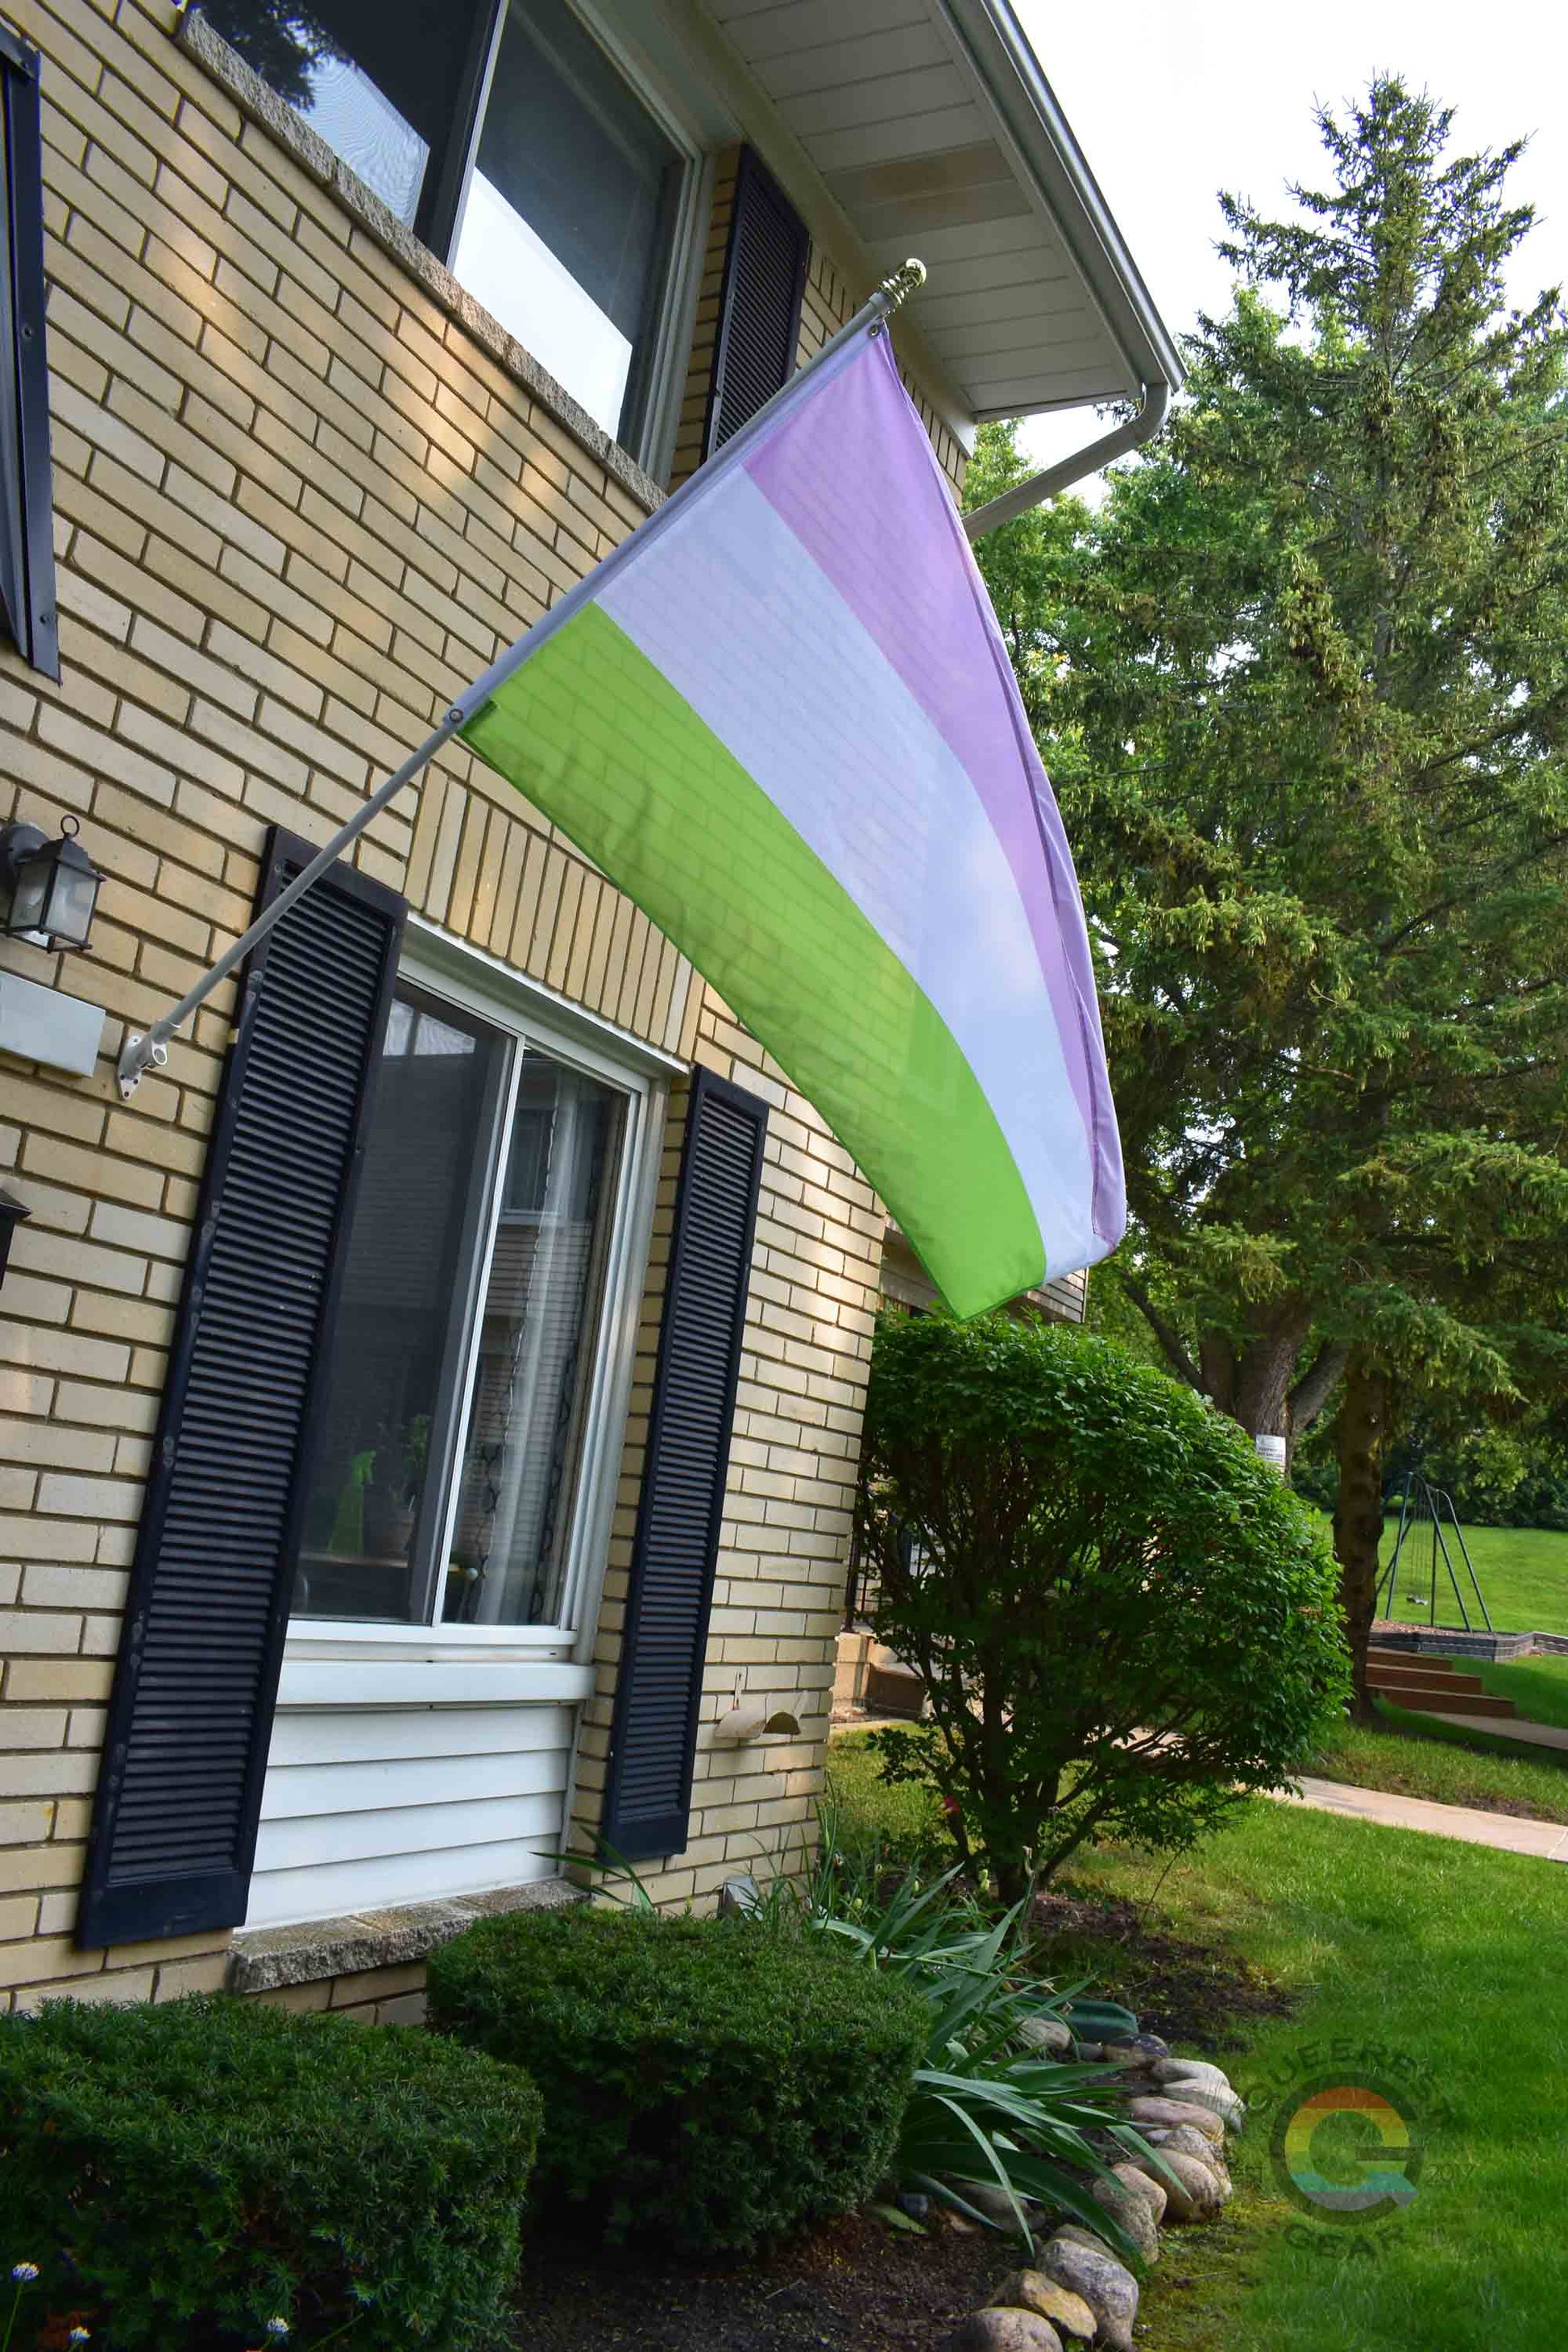 3’x5’ genderqueer pride flag hanging from a flagpole on the outside of a light brick house with dark shutters